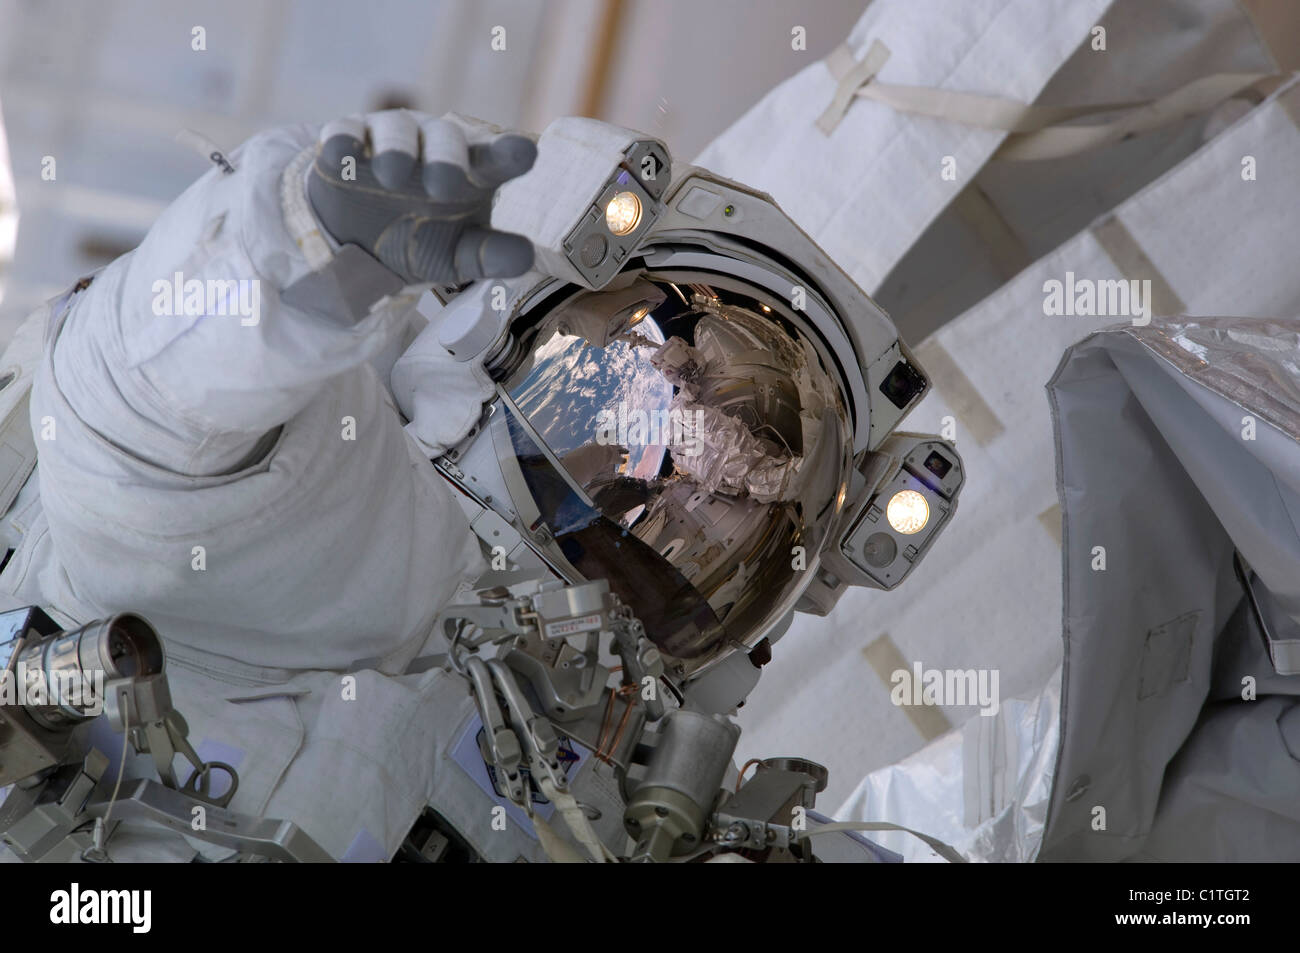 Astronaut participates in a session of extravehicular activity. Stock Photo